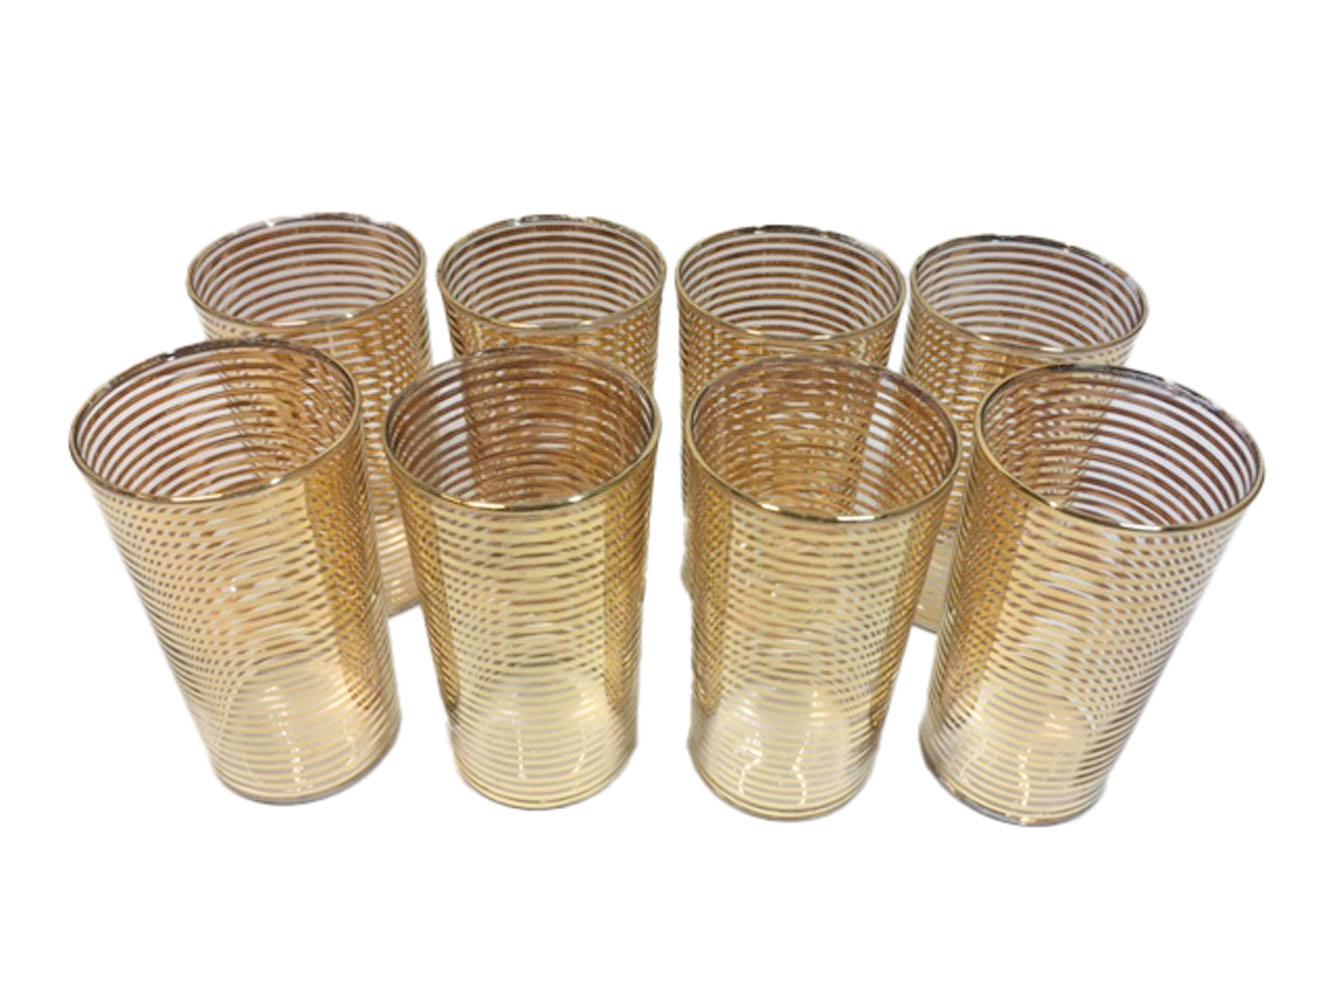 Art Deco Mid-Century Modern Highball Glasses with Gold Band Decoration